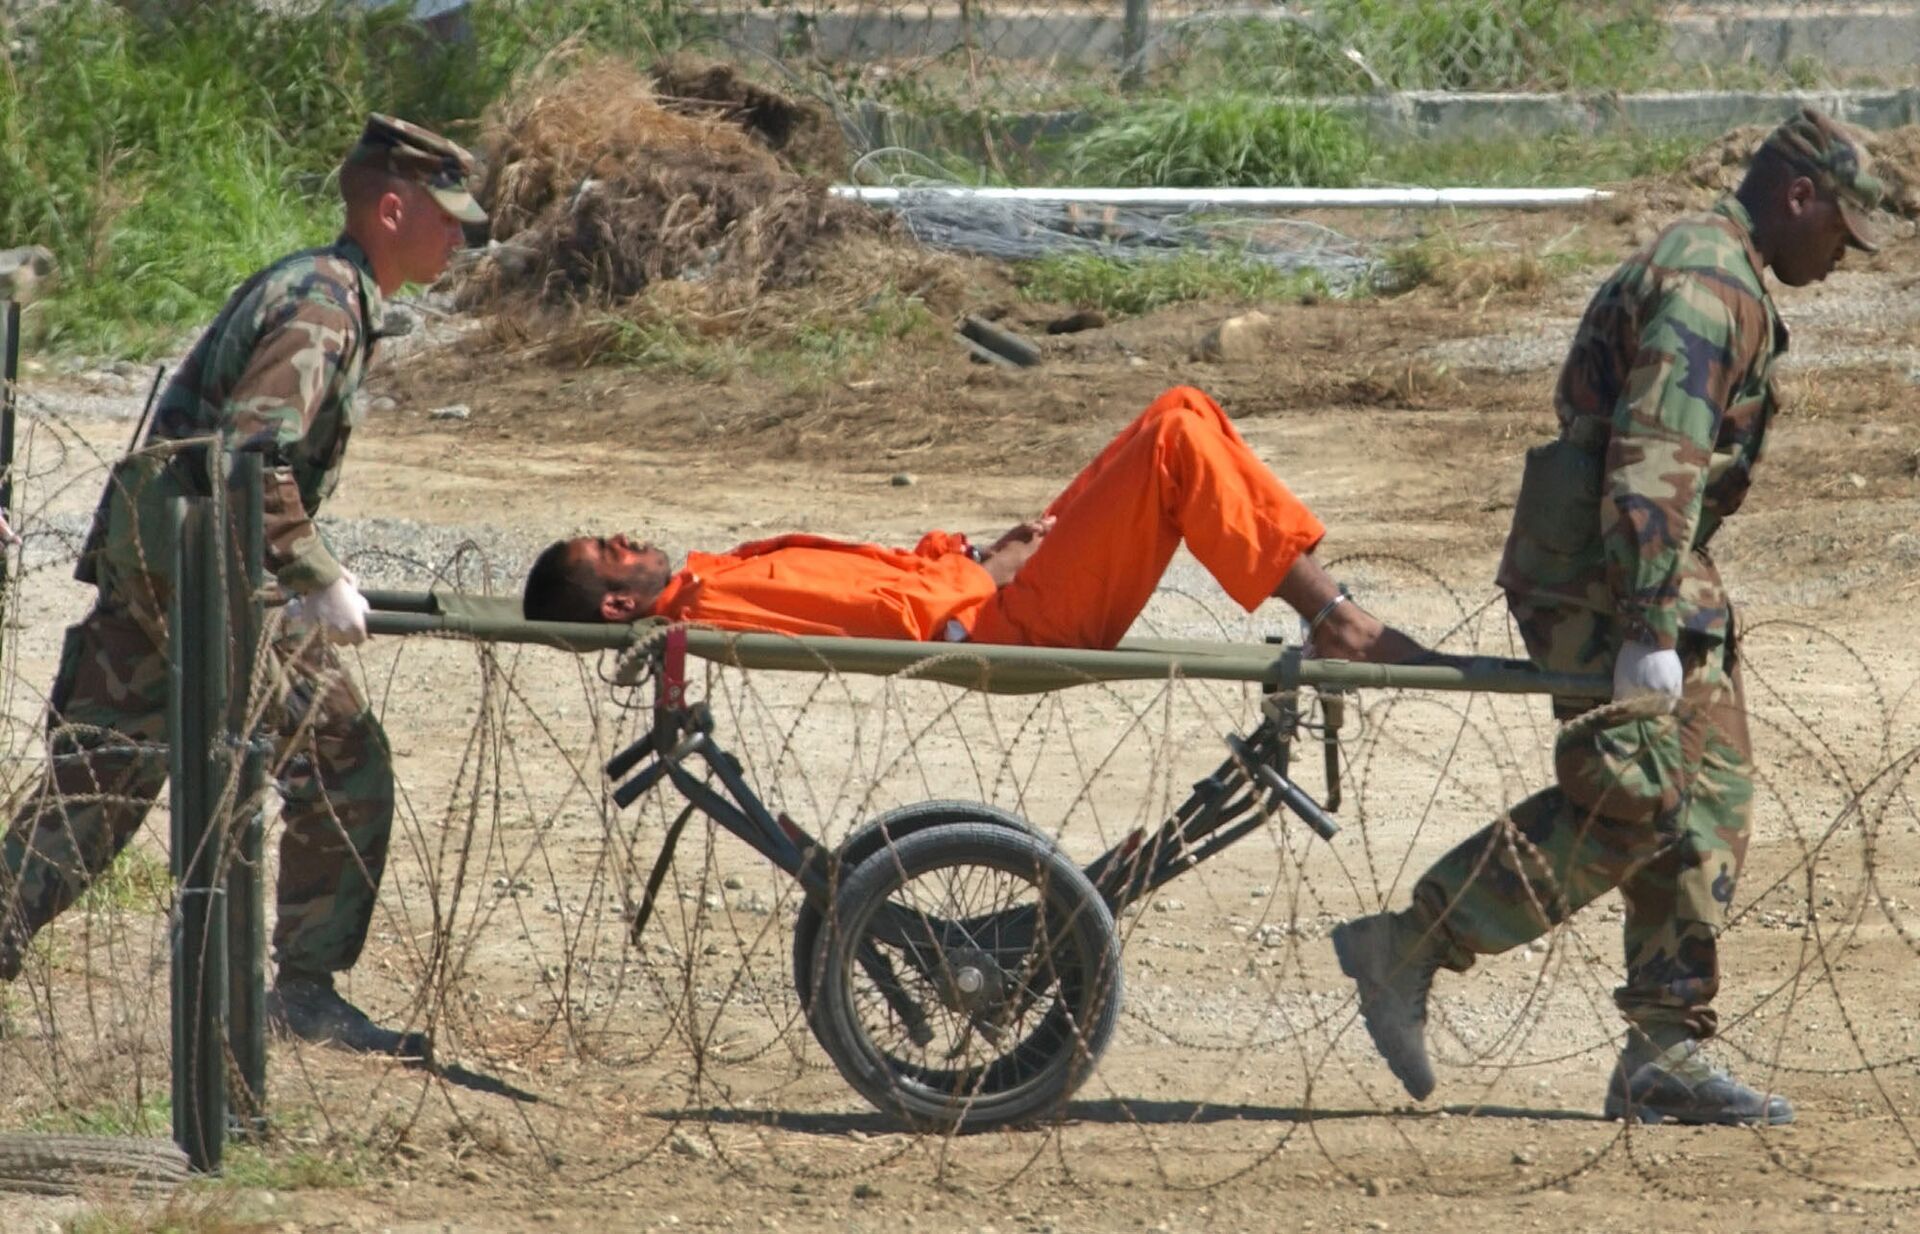 Biden Using ‘Methodical’ Approach to Shutter Guantanamo Facility by End of First Term - Report - Sputnik International, 1920, 09.06.2021